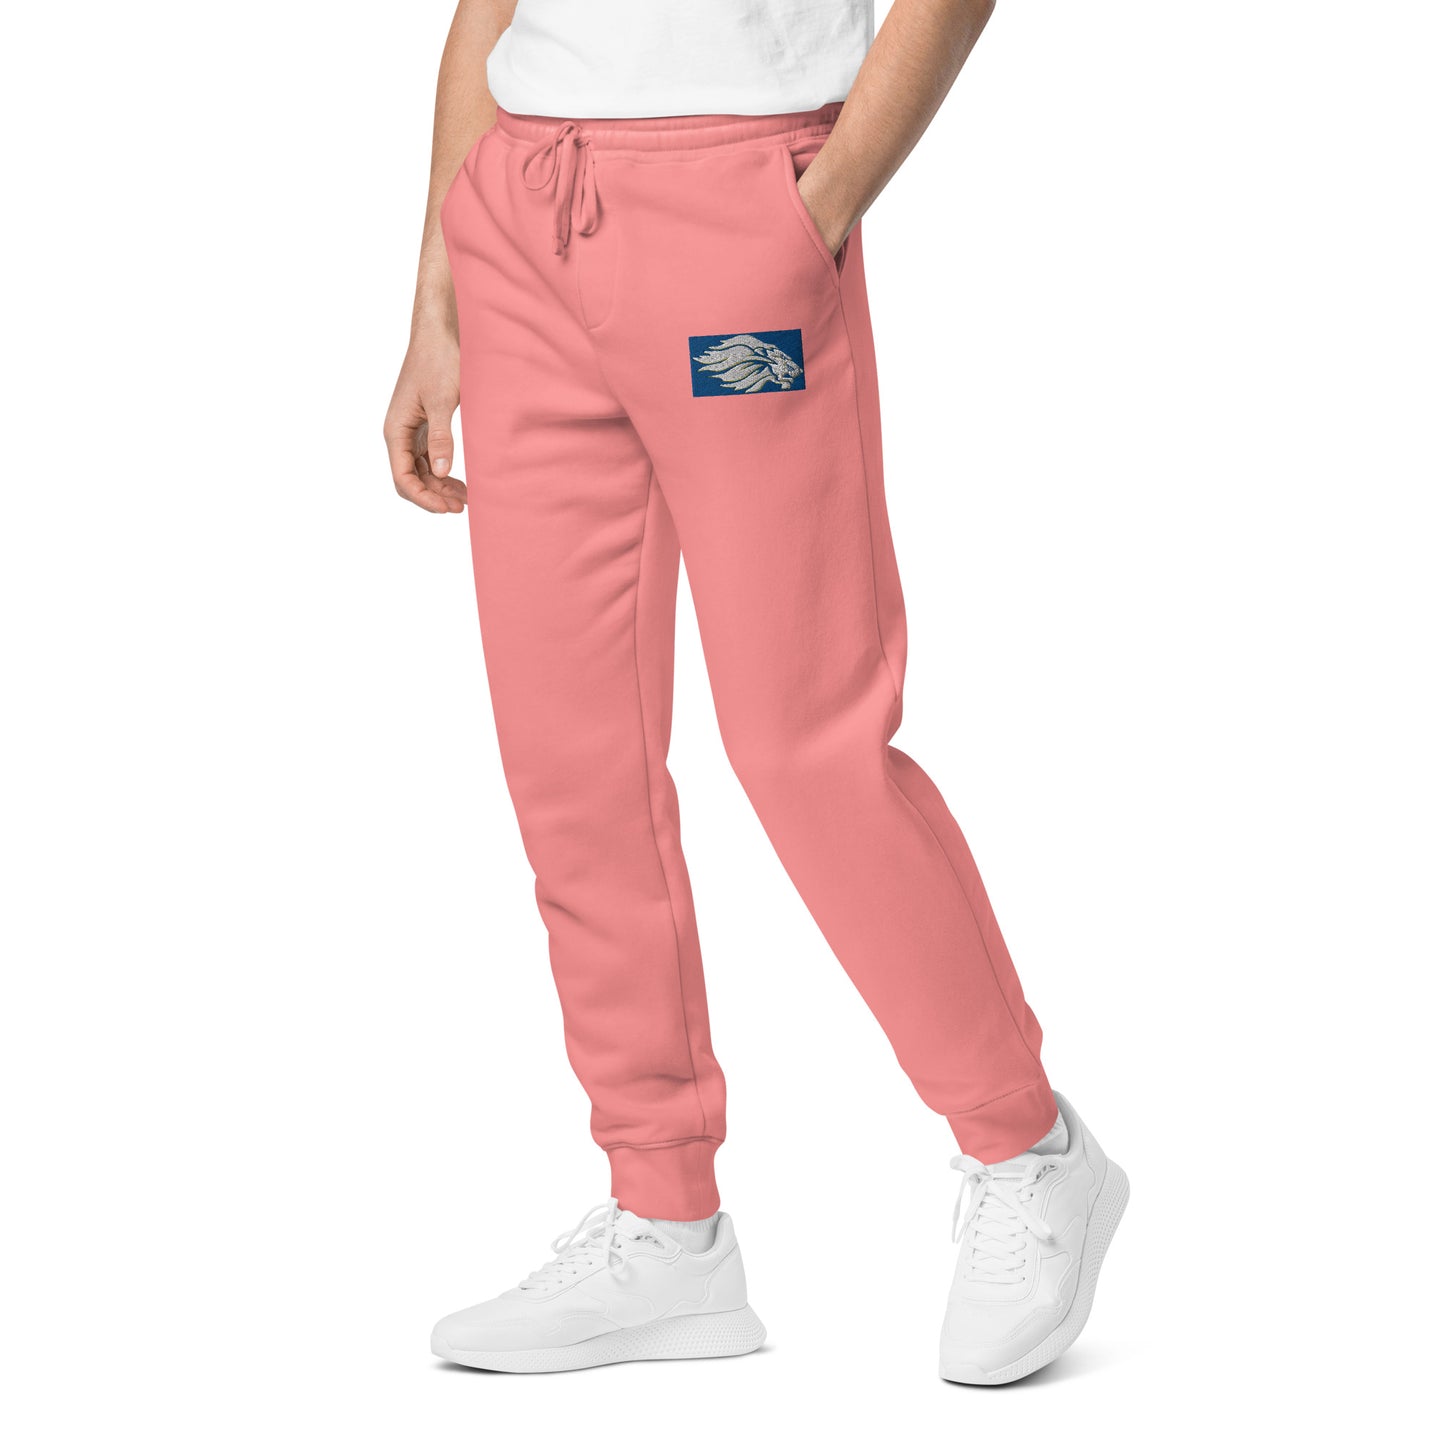 Lions Logo- Unisex pigment-dyed sweatpants with Embroidery